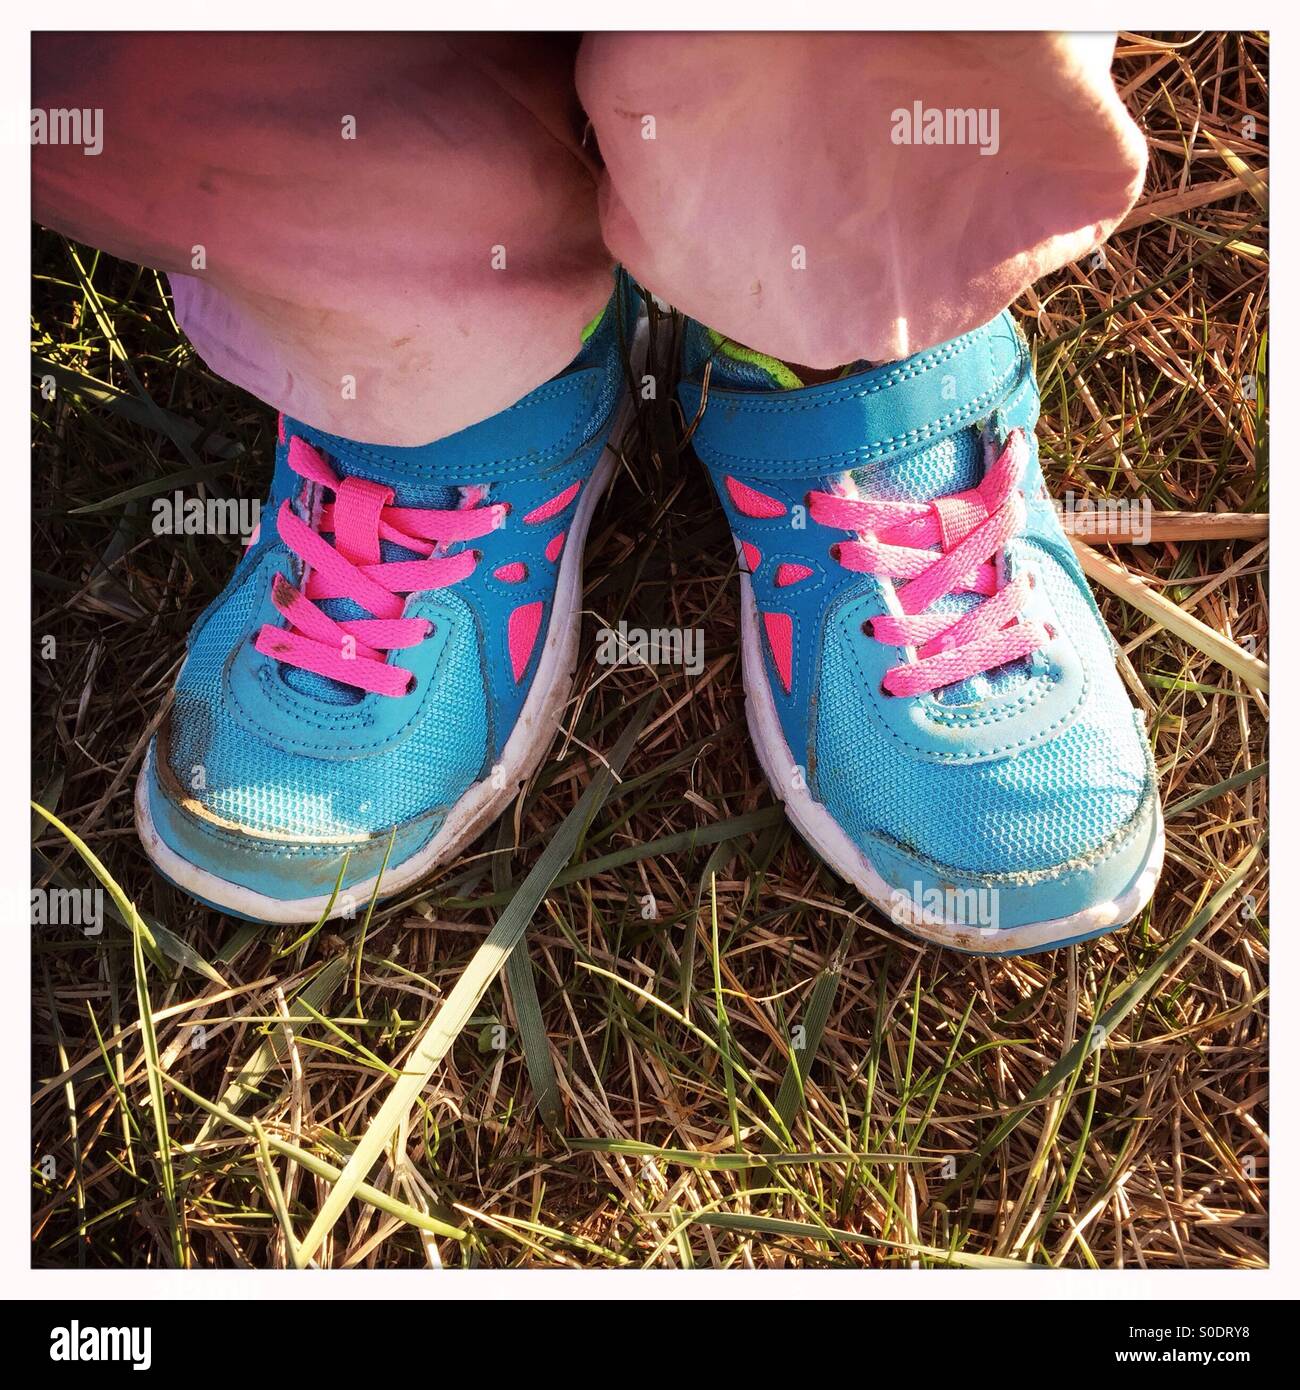 My new shoes! Stock Photo - Alamy